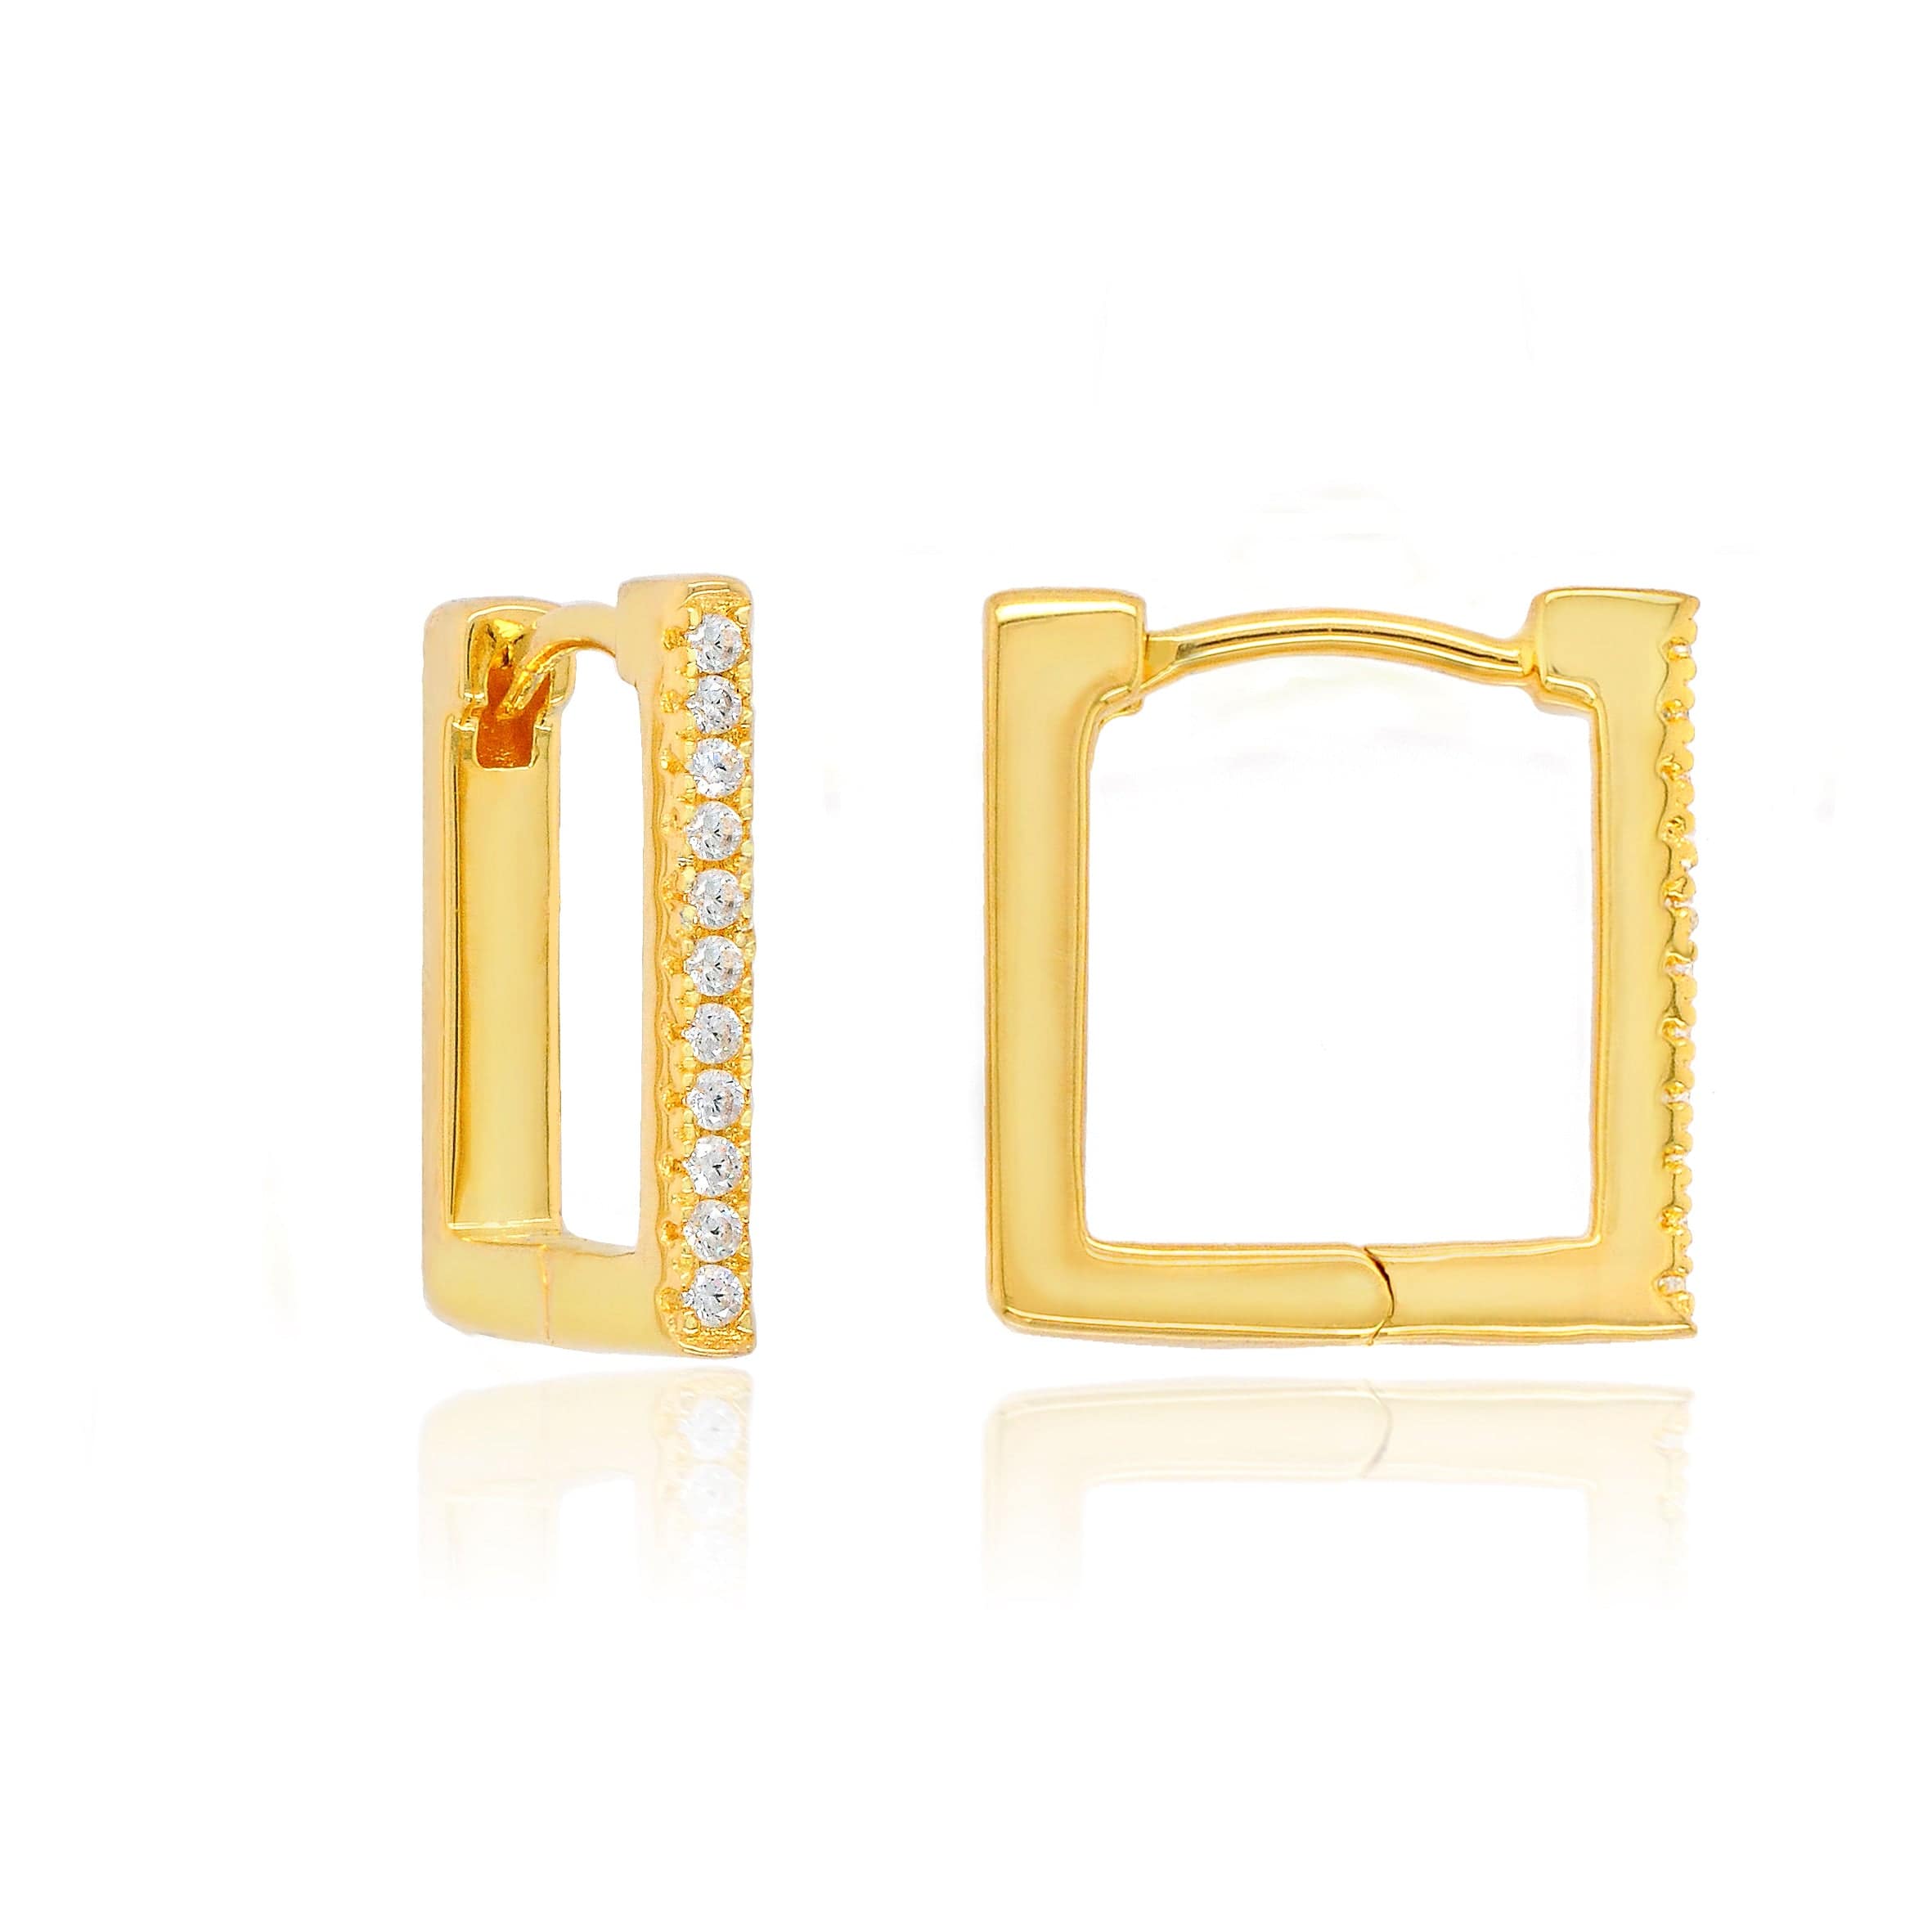 Lynora Silver Earring Gold Plated / Clear Square Huggie Sparkle Gold Earrings